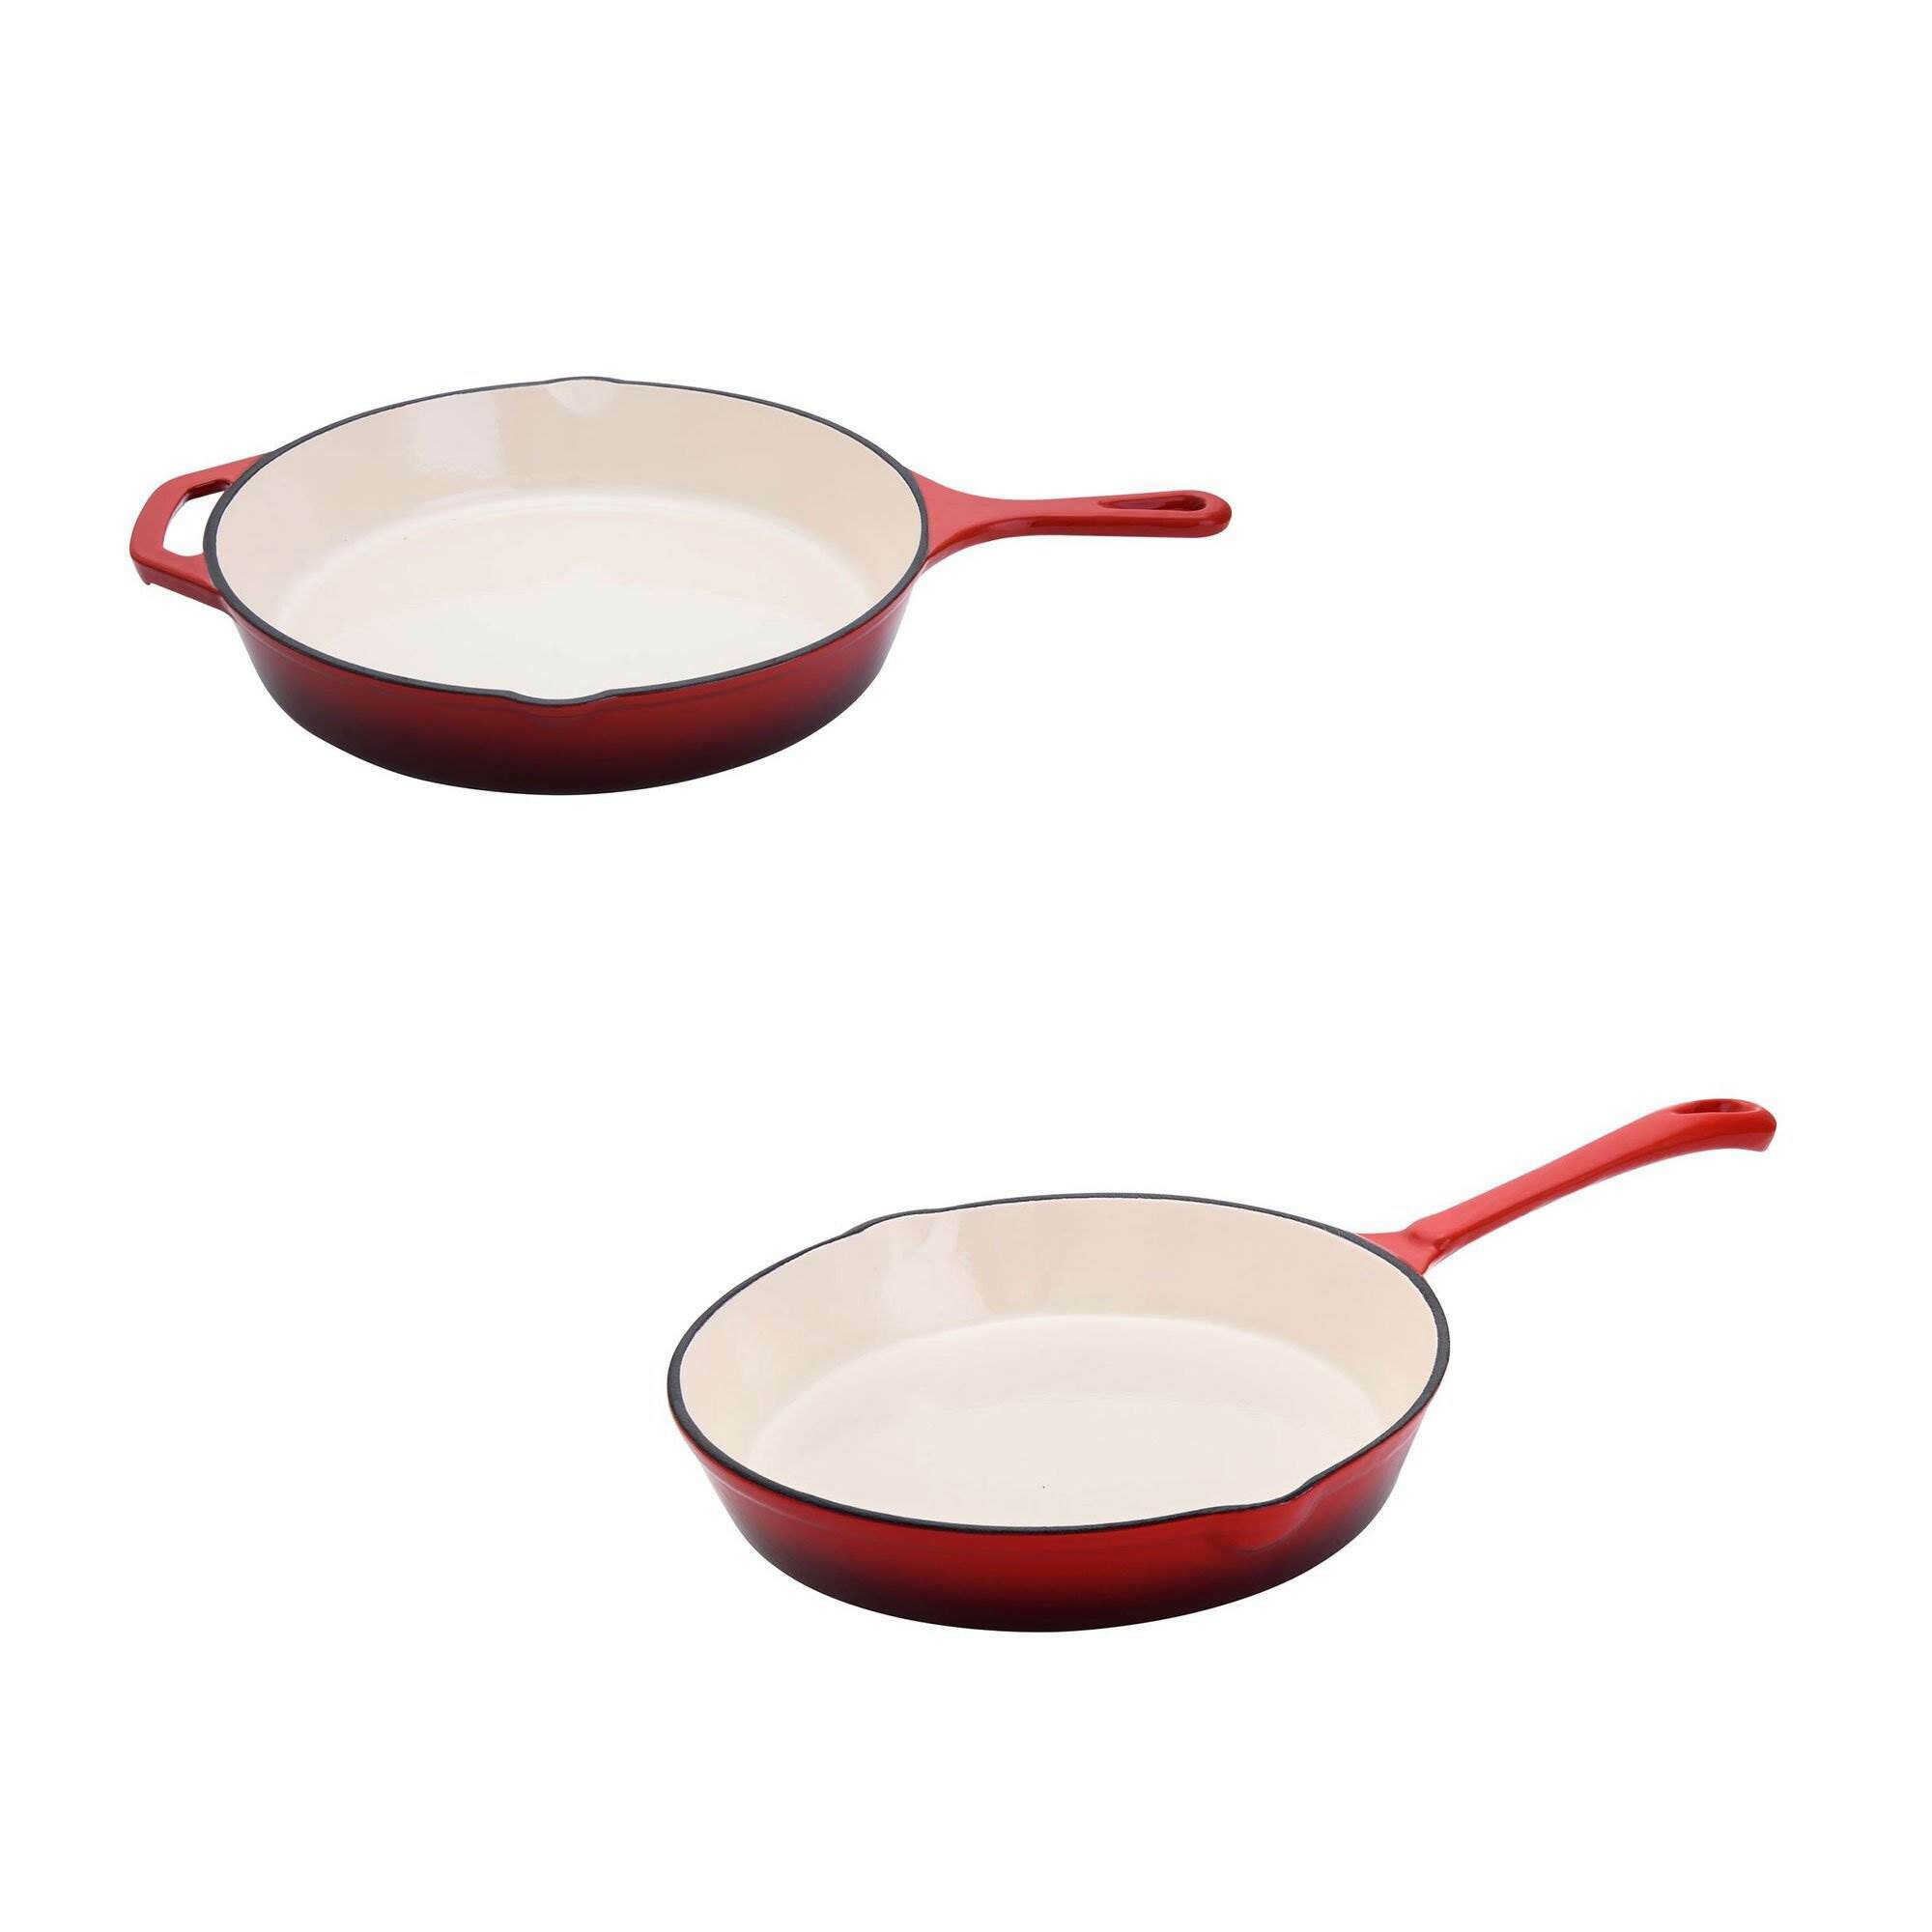  Bayou Classic 7434 14-in Cast Iron Skillet Features